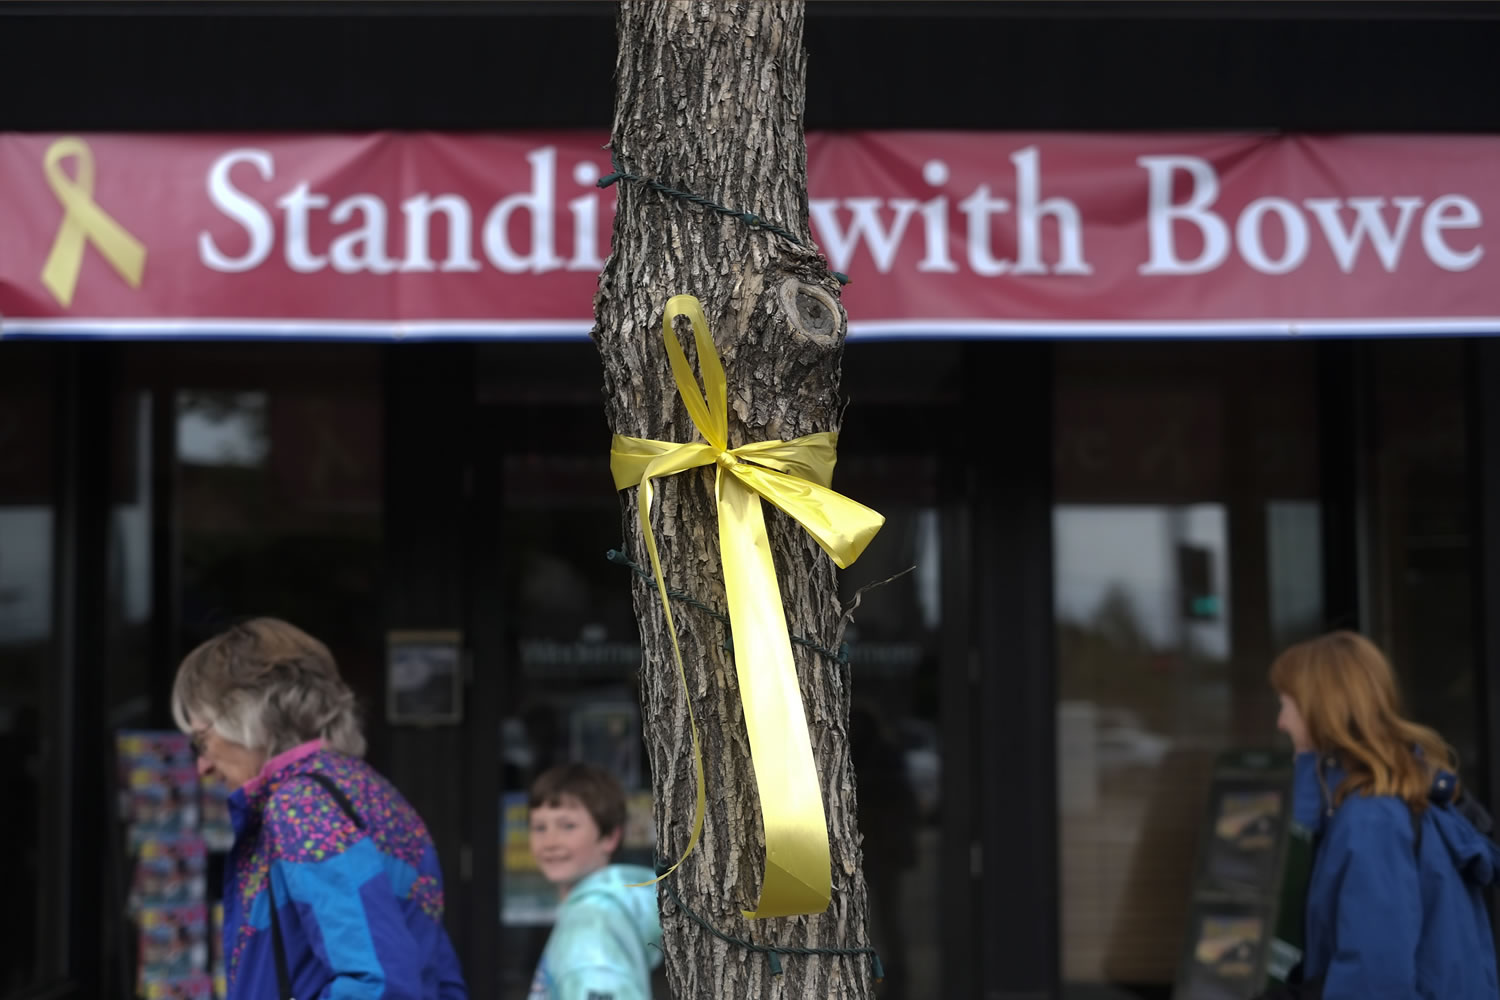 A yellow ribbon honoring captive U.S. Army Sgt. Bowe Bergdahl is shown tied to a tree in Hailey, Idaho, on Friday.